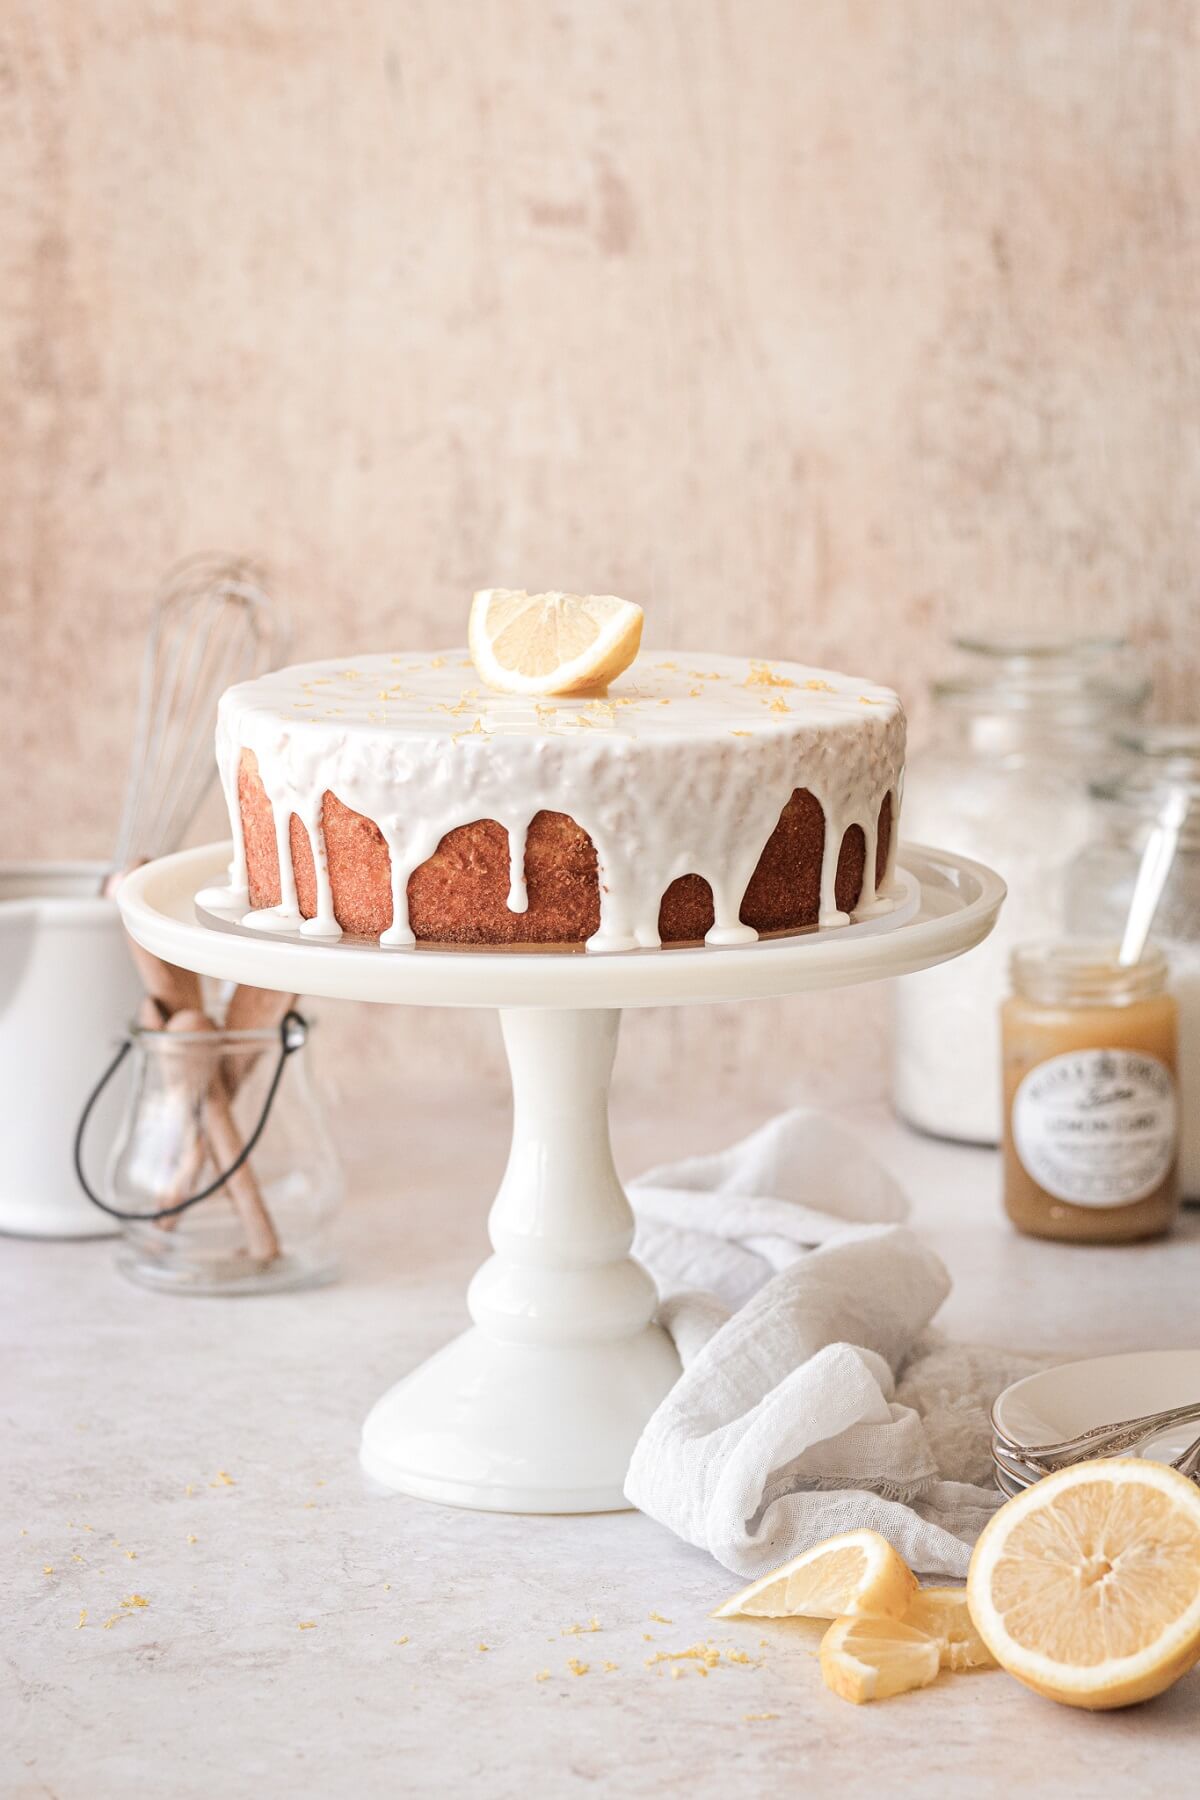 Lemon ricotta cake drizzled with lemon icing and topped with a lemon wedge..